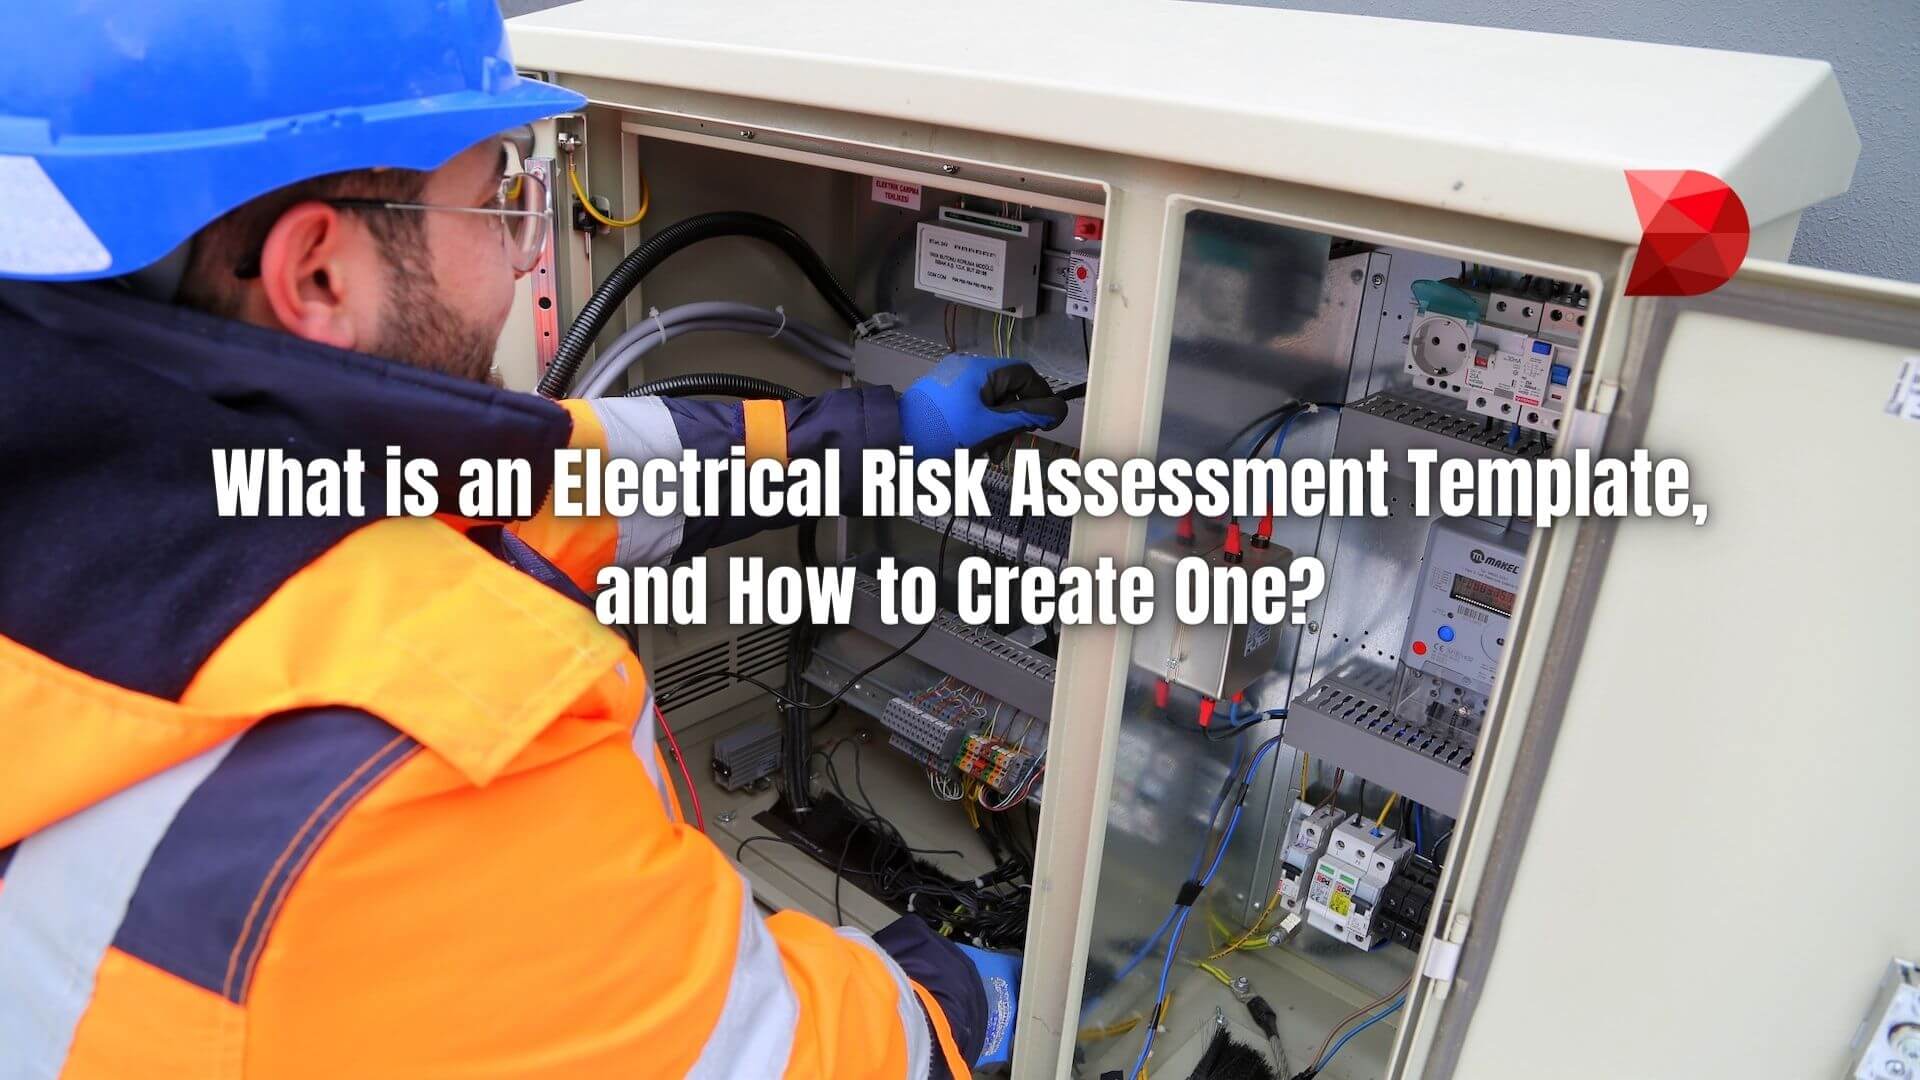 Creating an electrical equipment risk assessment template helps ensure the safety and smooth operation of electrical equipment. Learn how!